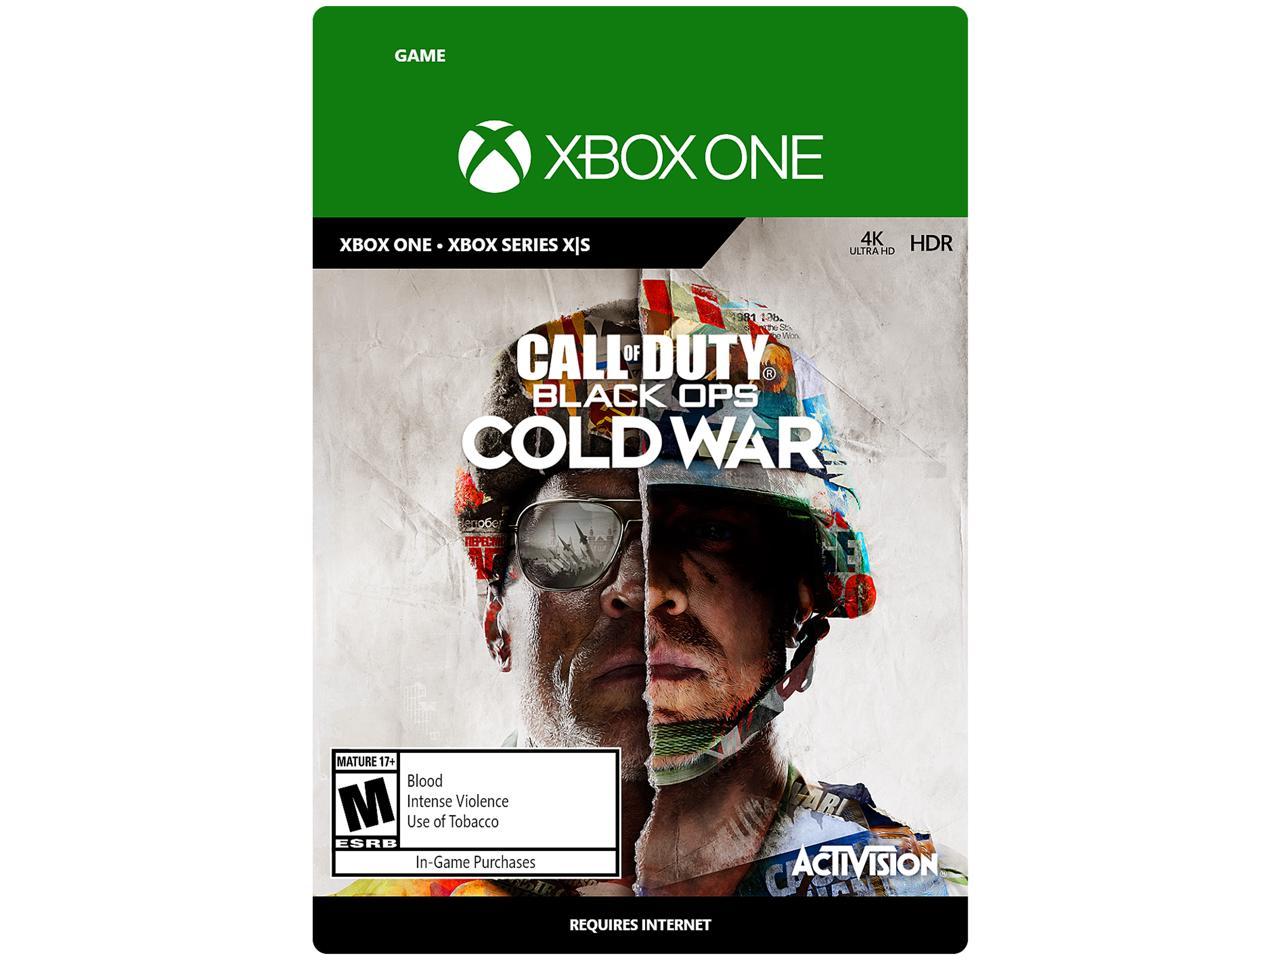 call of duty black ops cold war xbox one